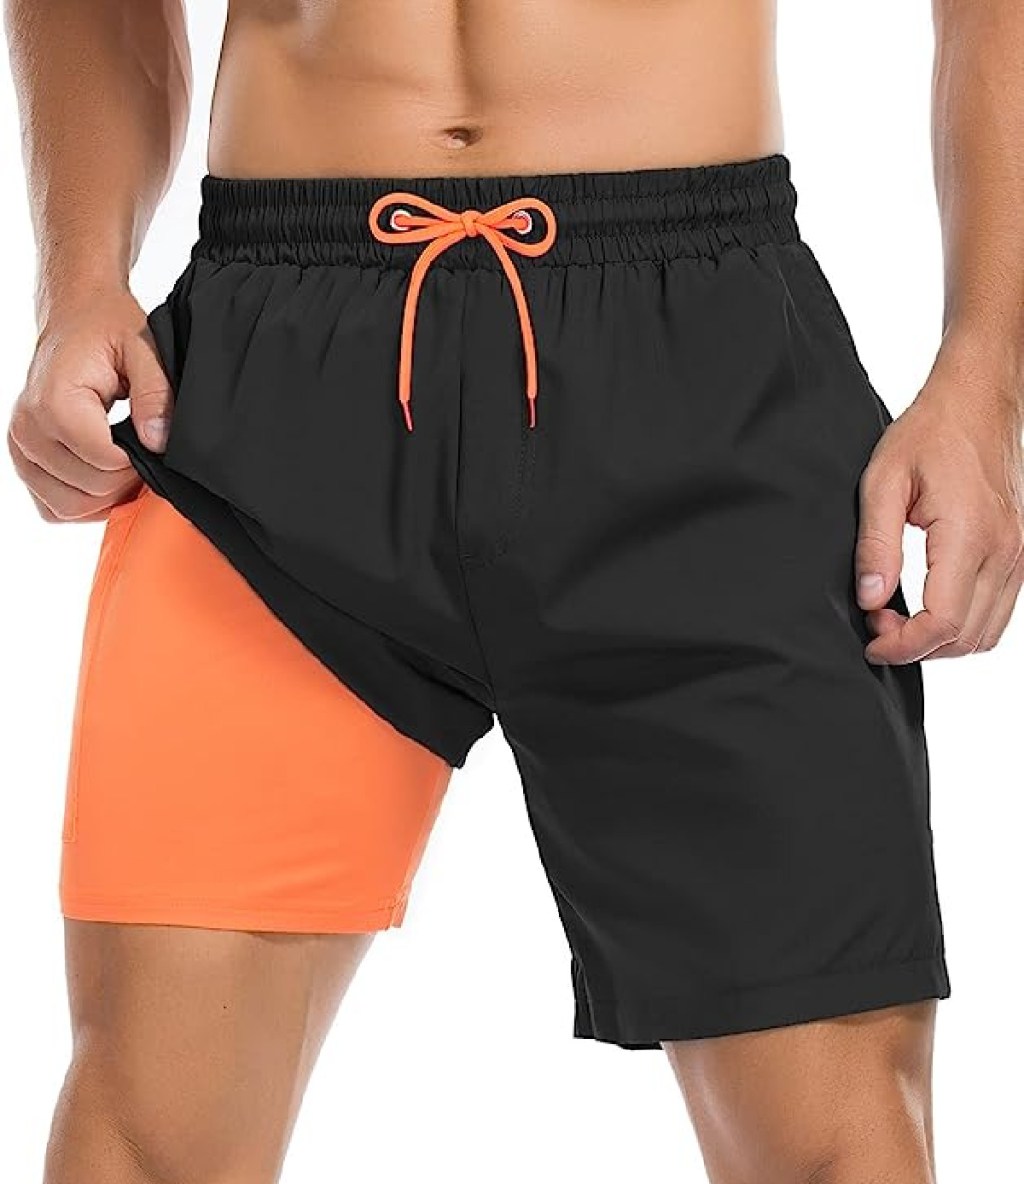 Man wearing mens swim trunks with a compression liner from Century Star on Amazon 